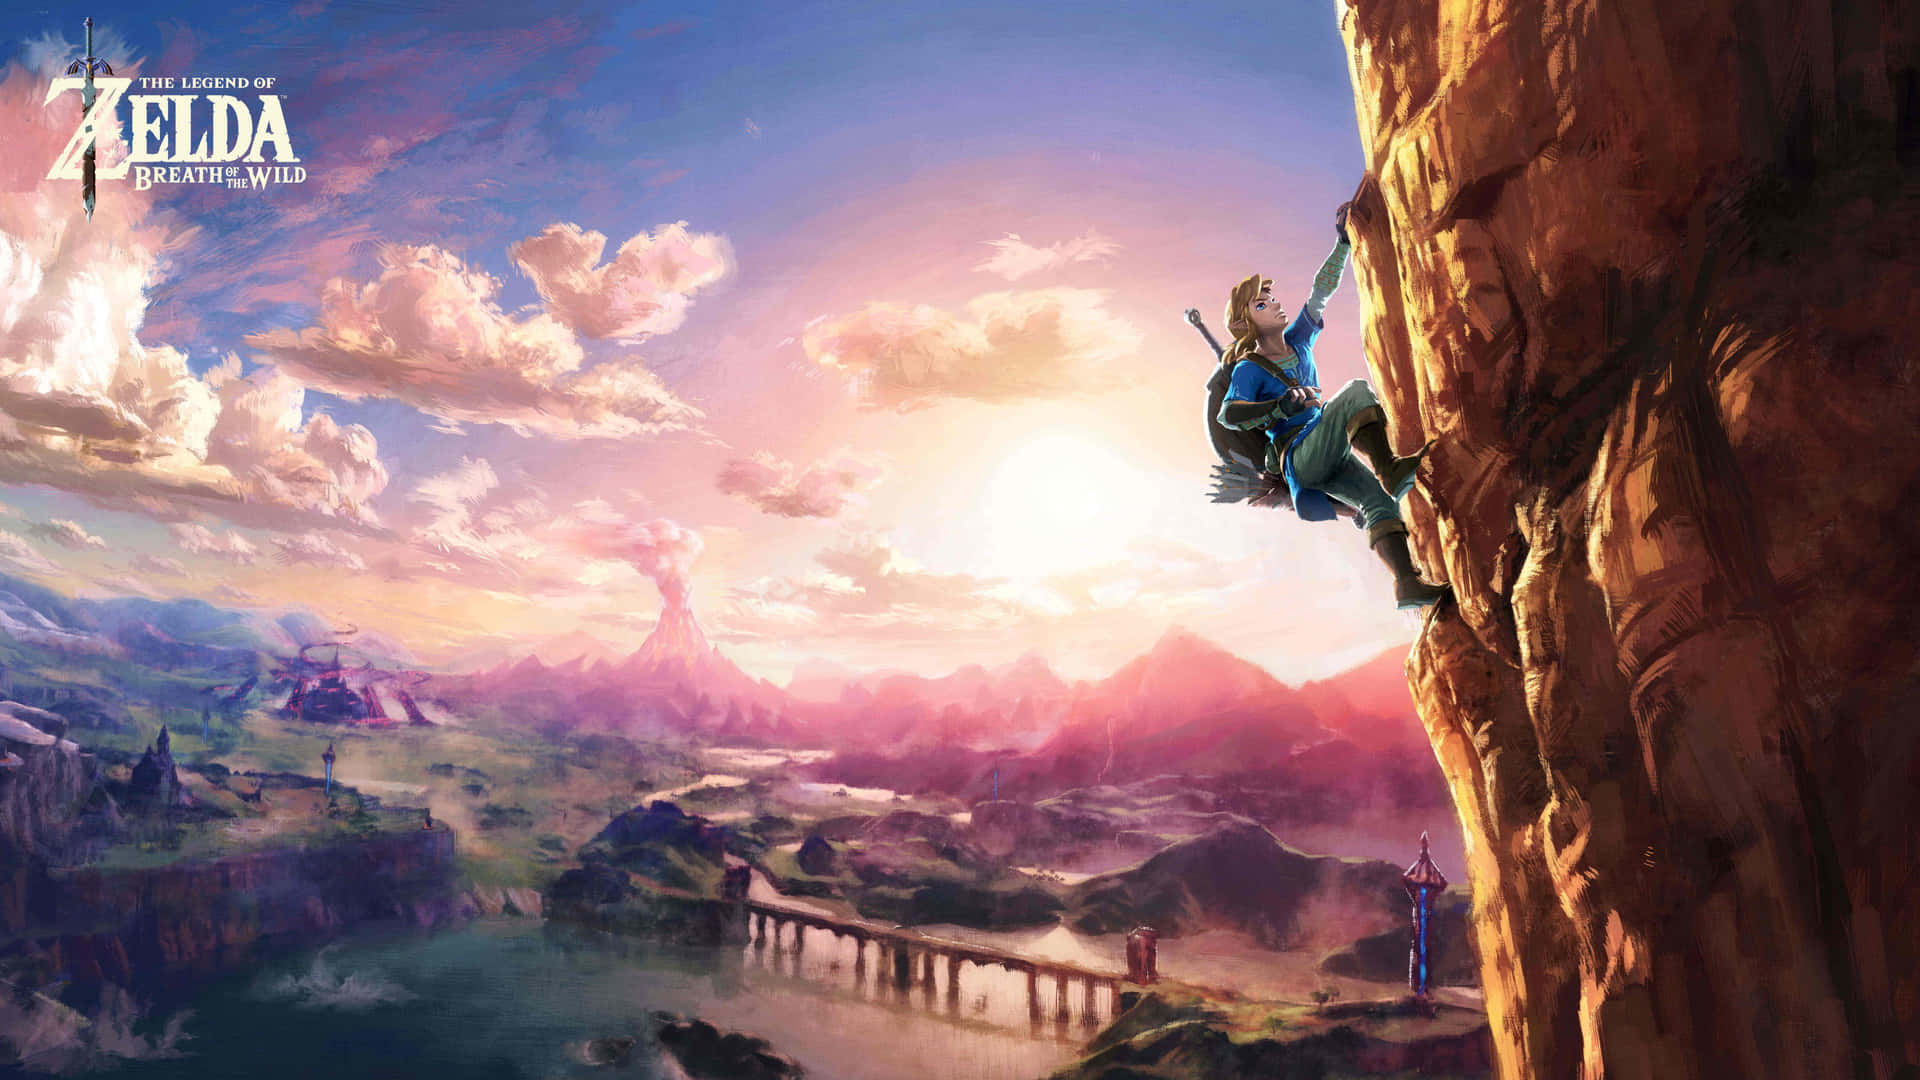 Explore the world of Hyrule in the Legend Of Zelda